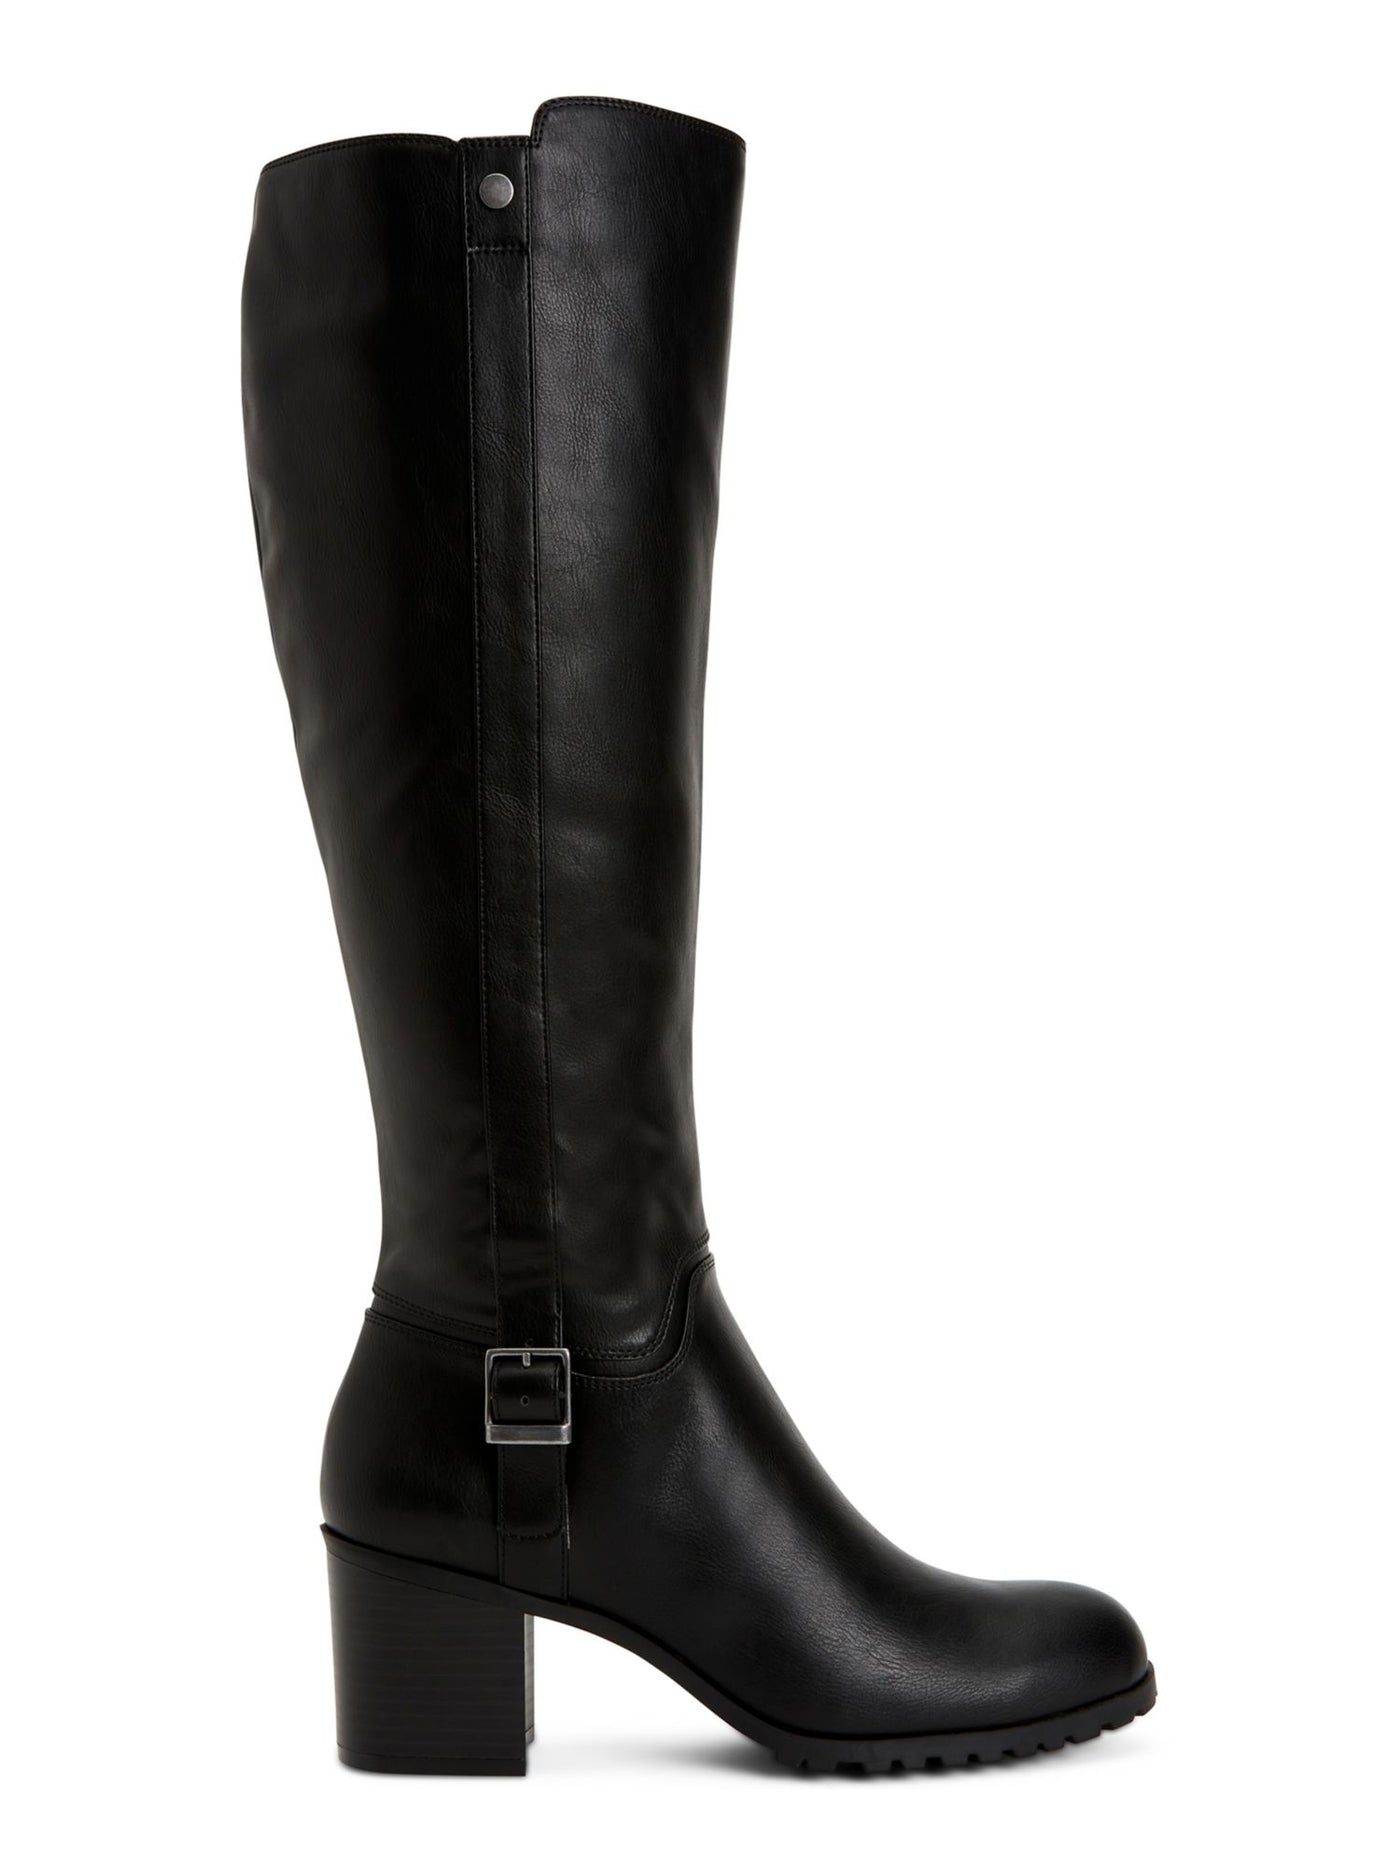 STYLE & COMPANY Womens Black Buckle Accent Round Toe Stacked Heel Zip-Up Dress Boots 7